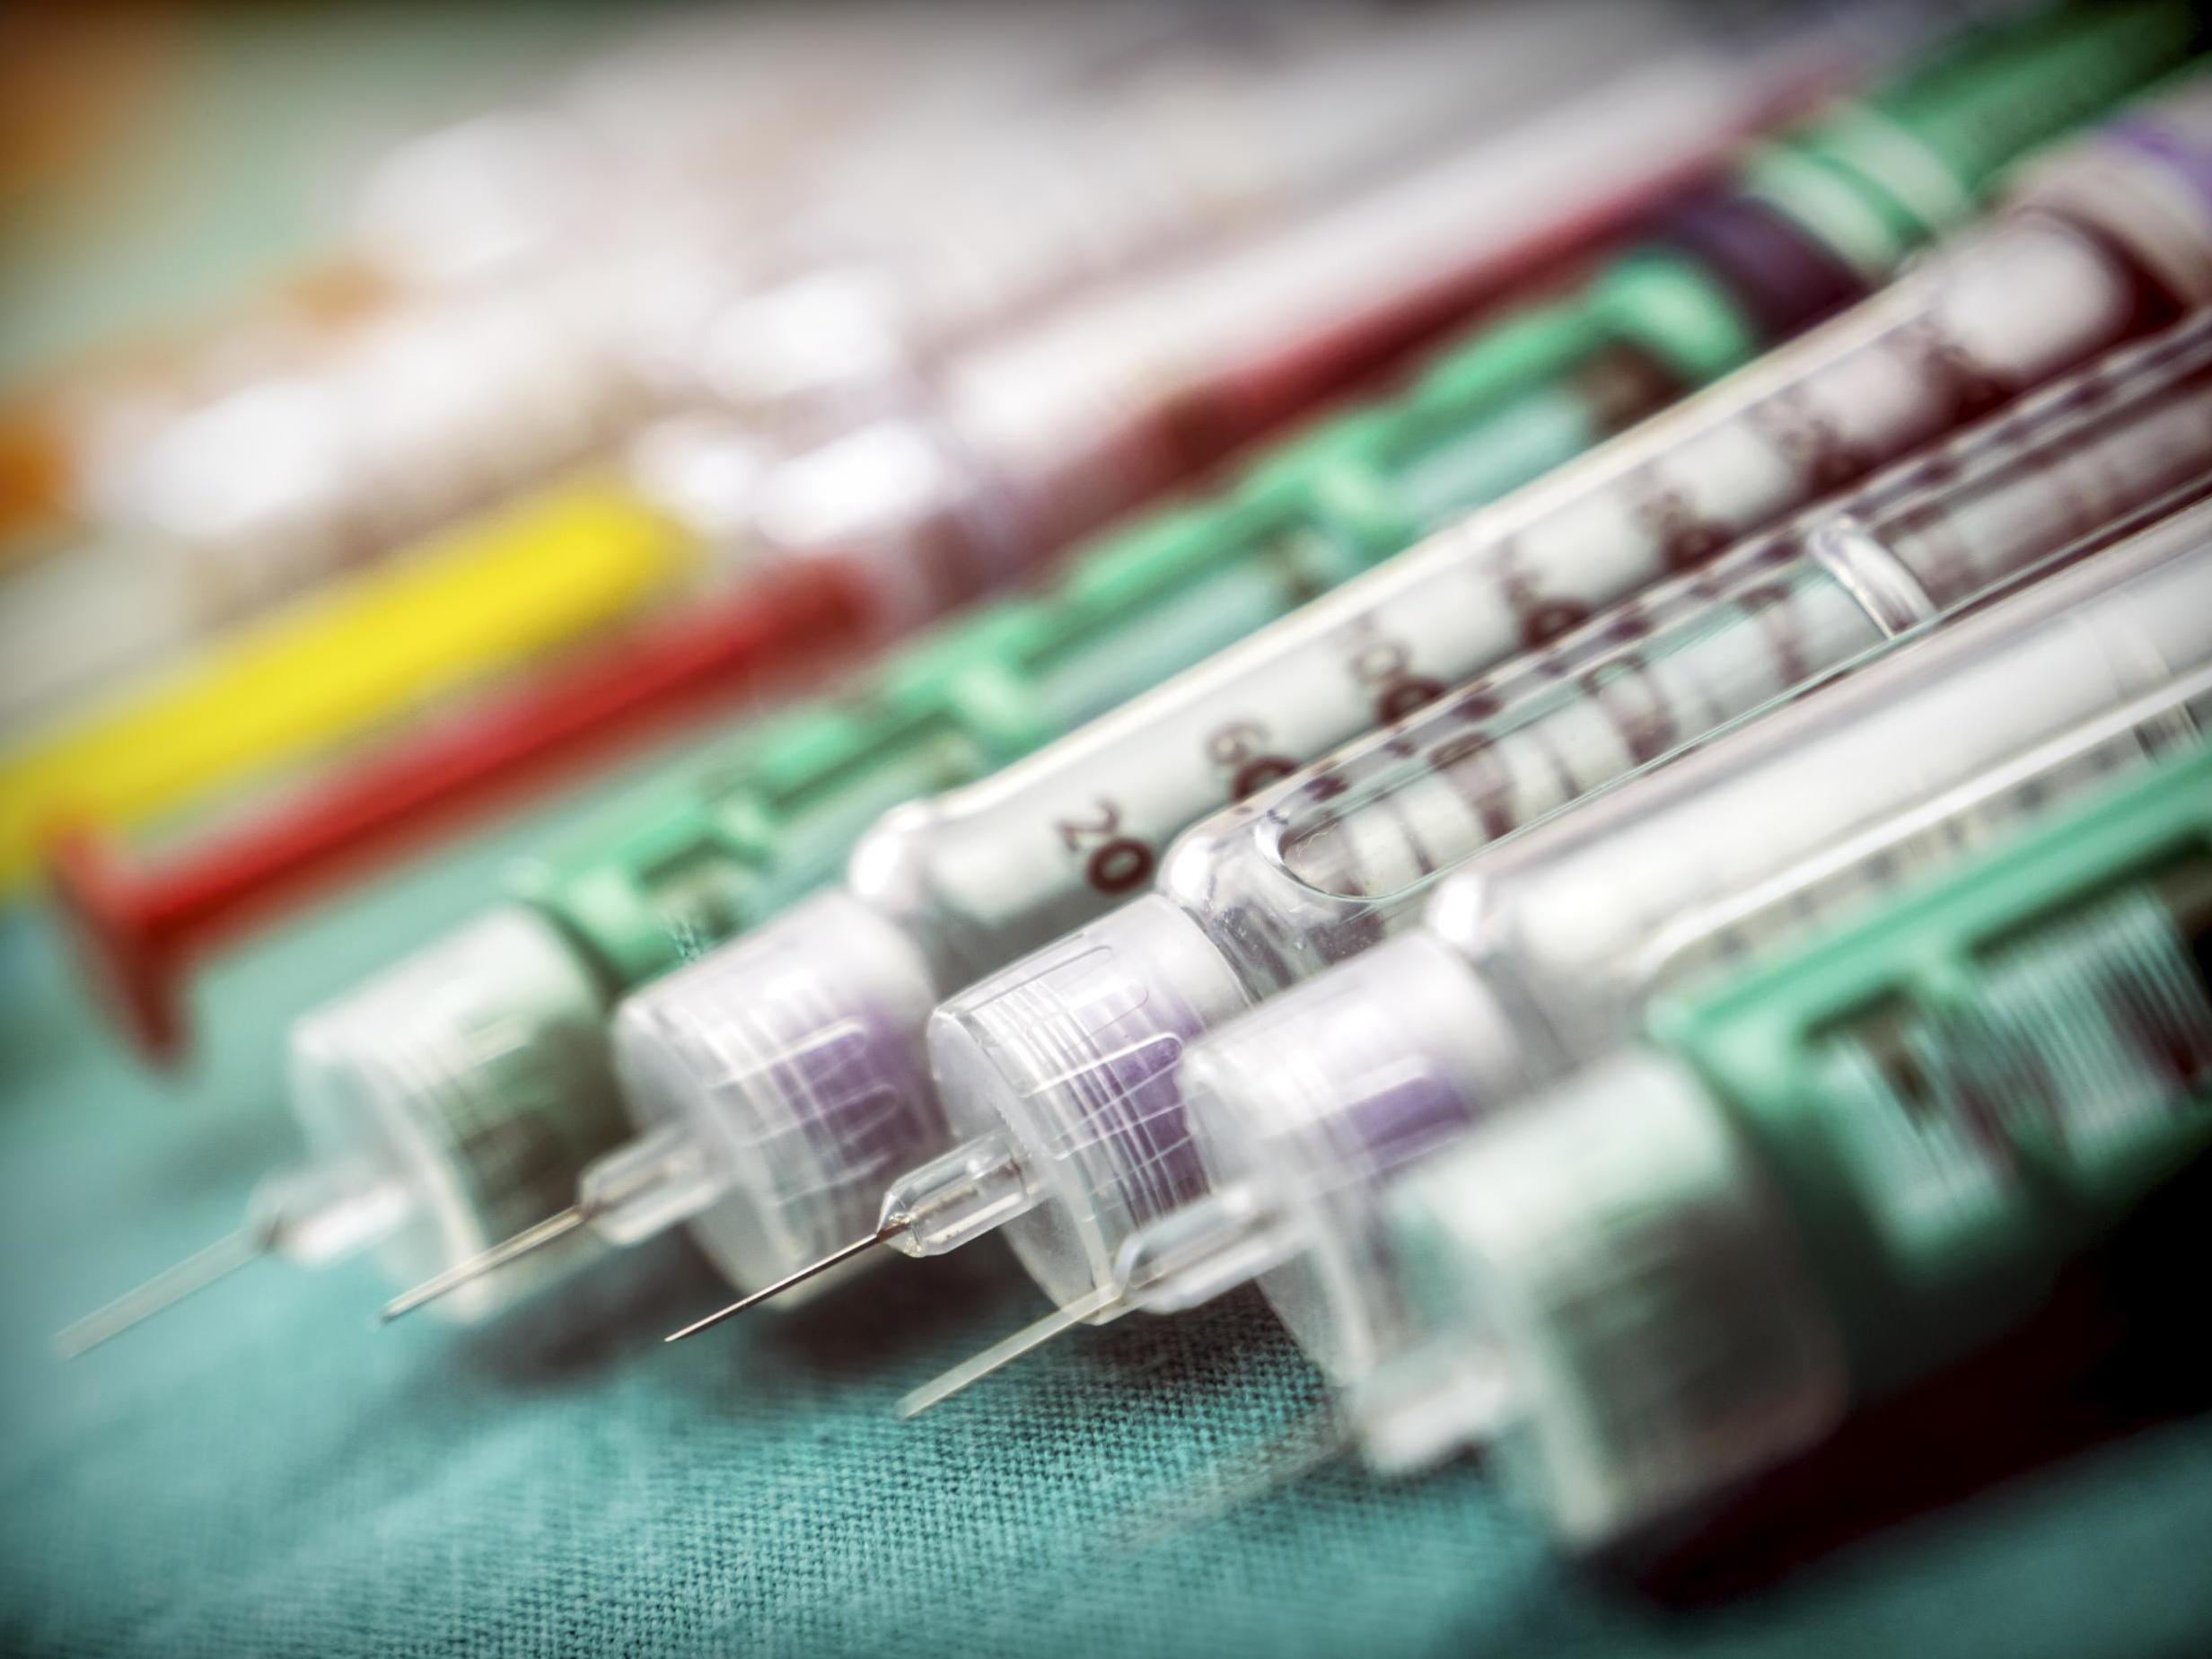 Insulin can be unaffordable for many diabetes sufferers in countries with privatised health provision (Getty Images/iStockphoto)